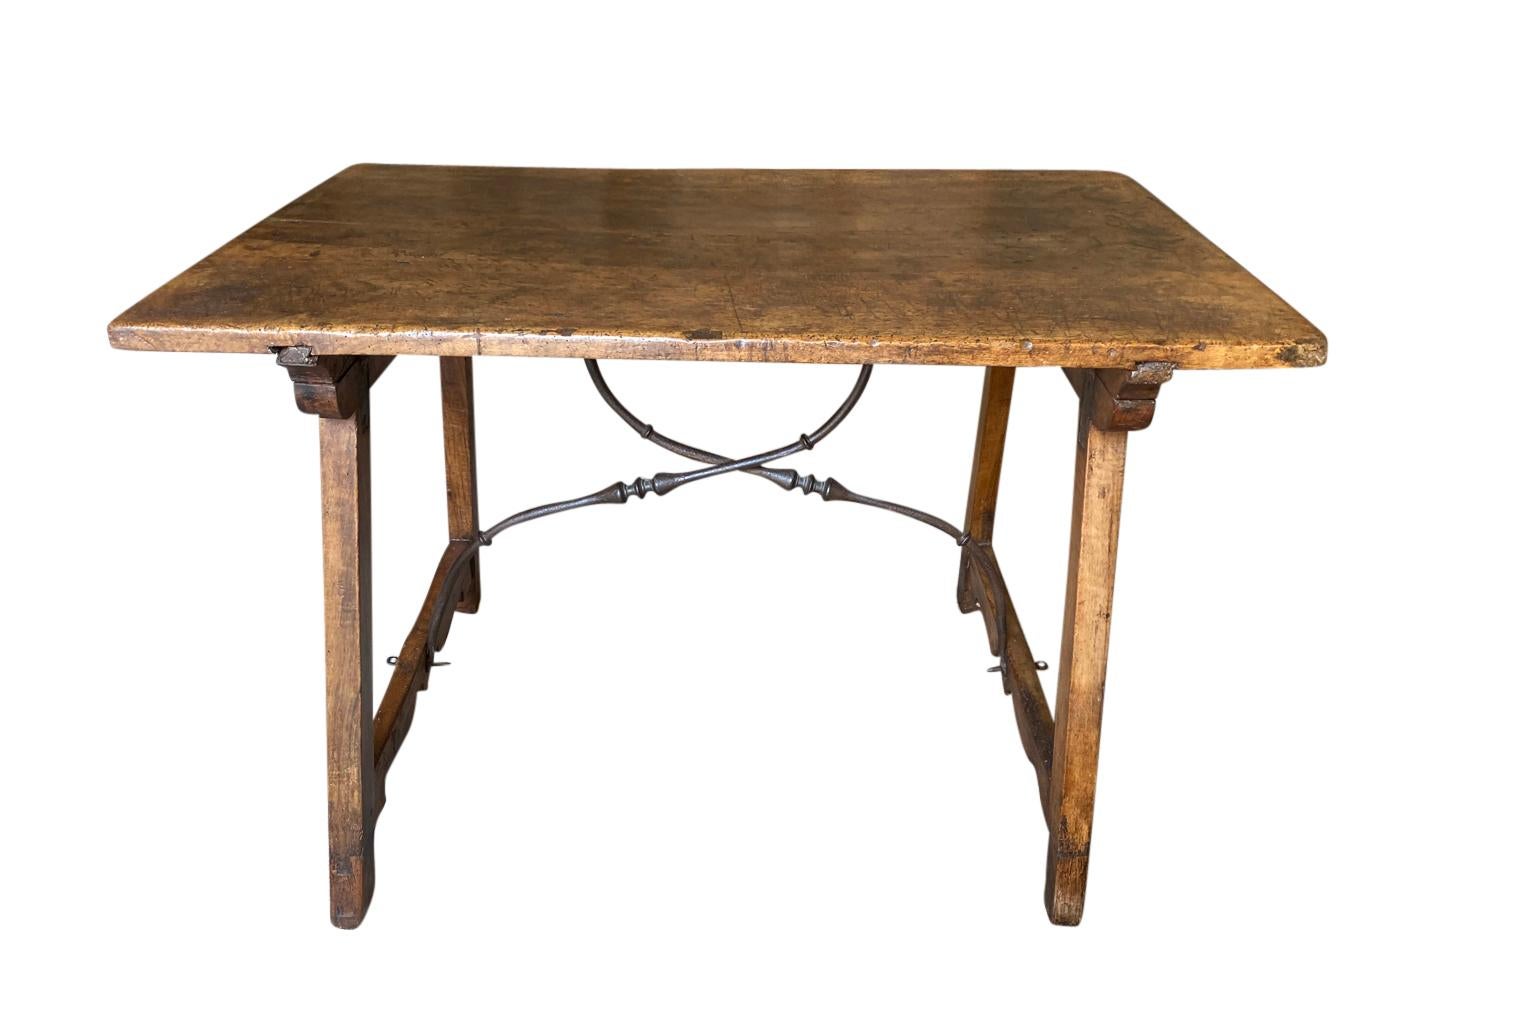 A stunning 18th century Traveling Table - Writing Table from the Catalan region of Spain. Beautifully constructed from stunning walnut with a solid board top and hand forged iron stretchers. The table is designed to collapse. Gorgeous patina - warm